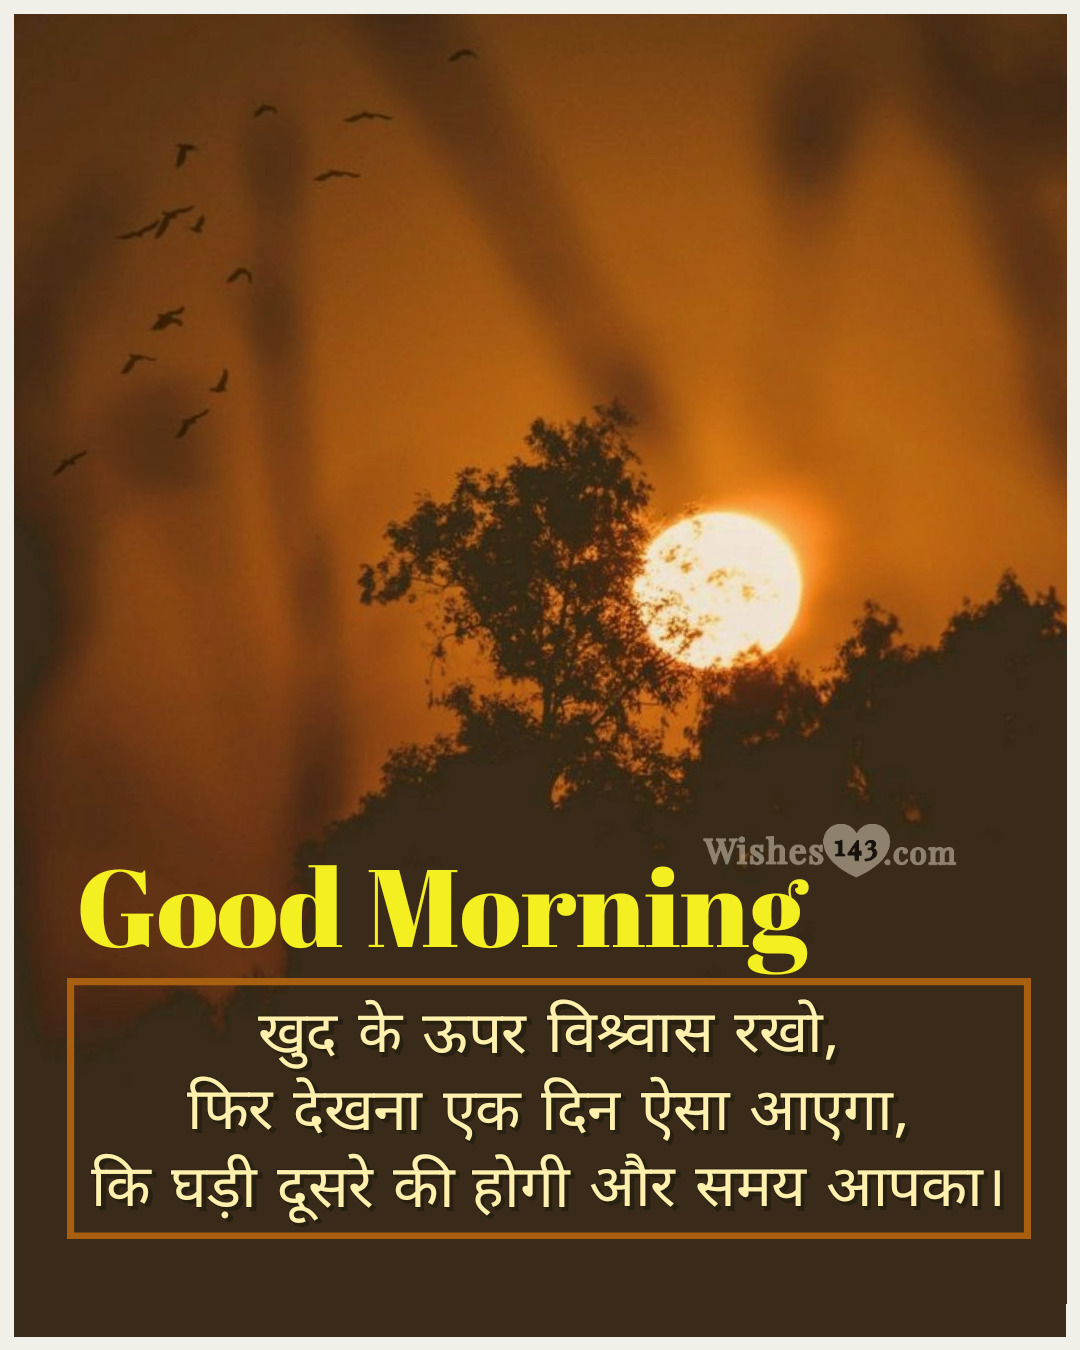 Beautiful Good Morning Quotes In Hindi - Wishes143.com